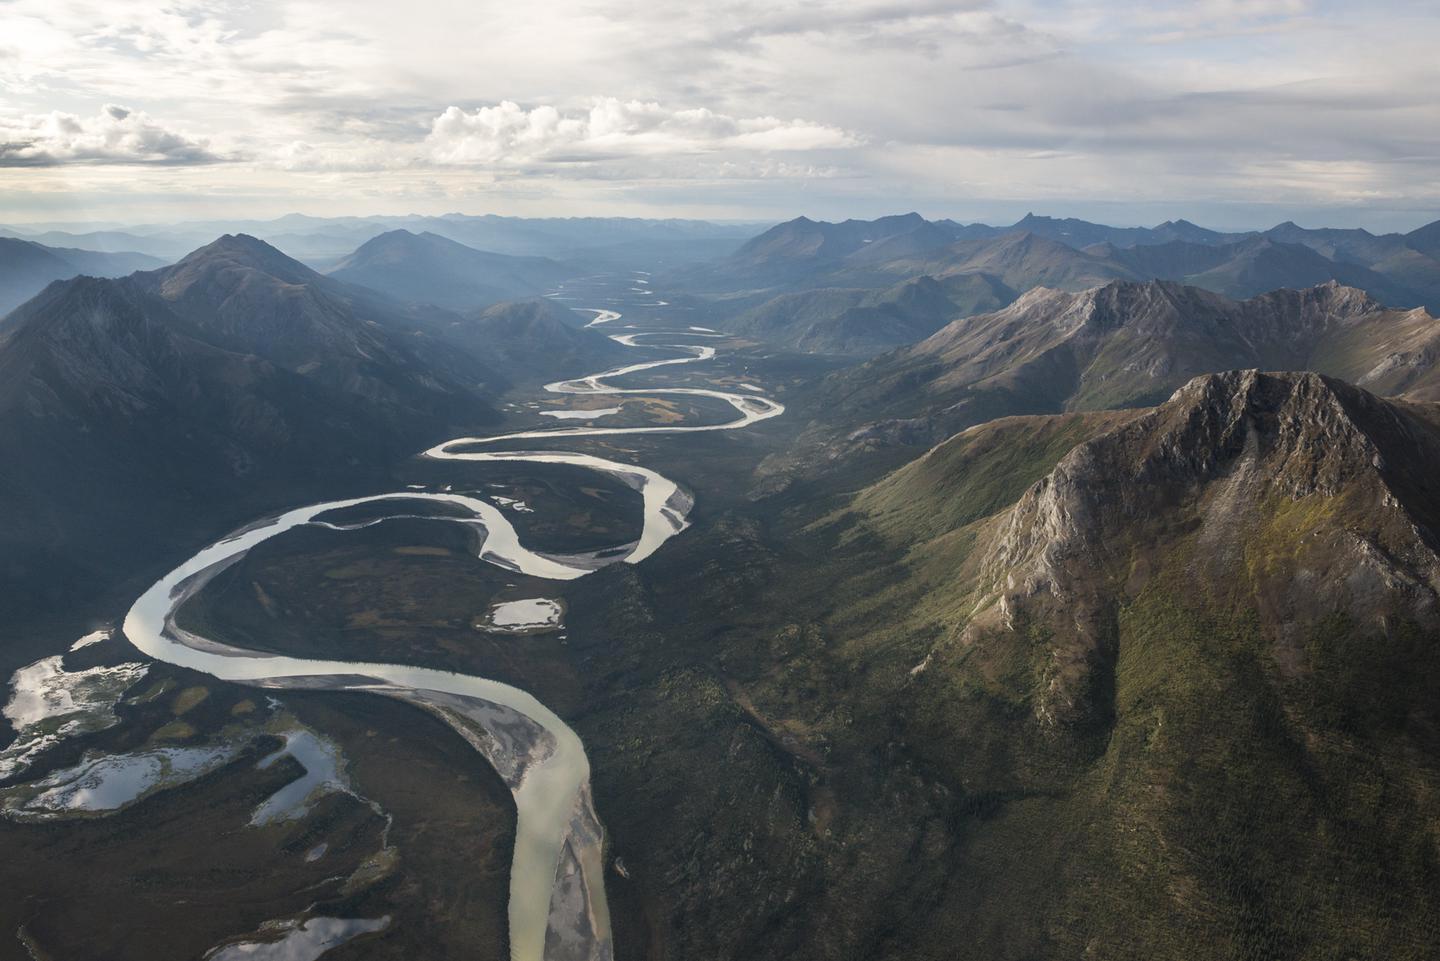 Preview photo of Gates Of The Arctic National Park & Preserve